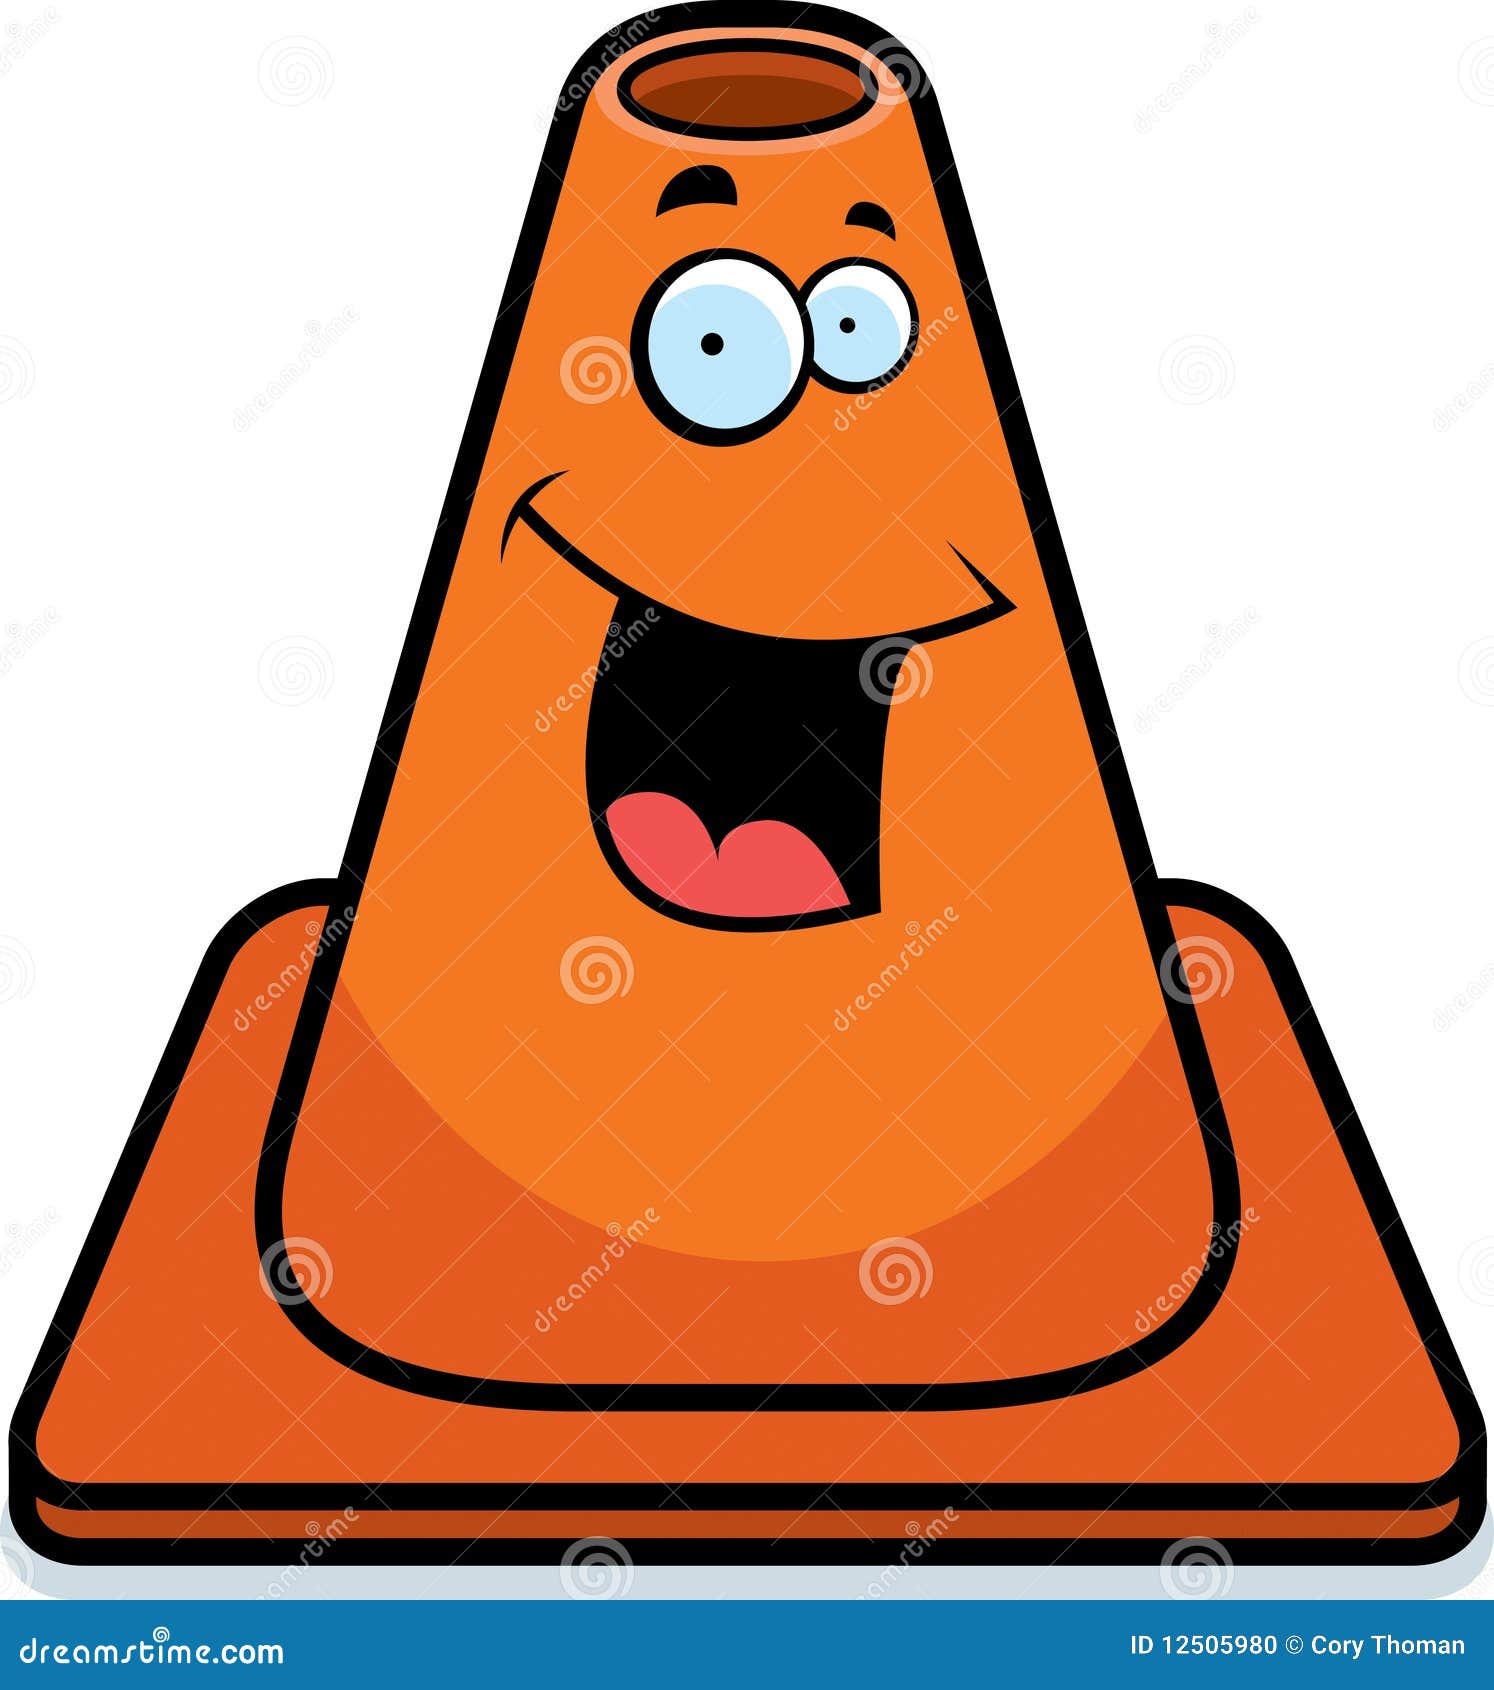 A cartoon traffic cone smiling and happy.